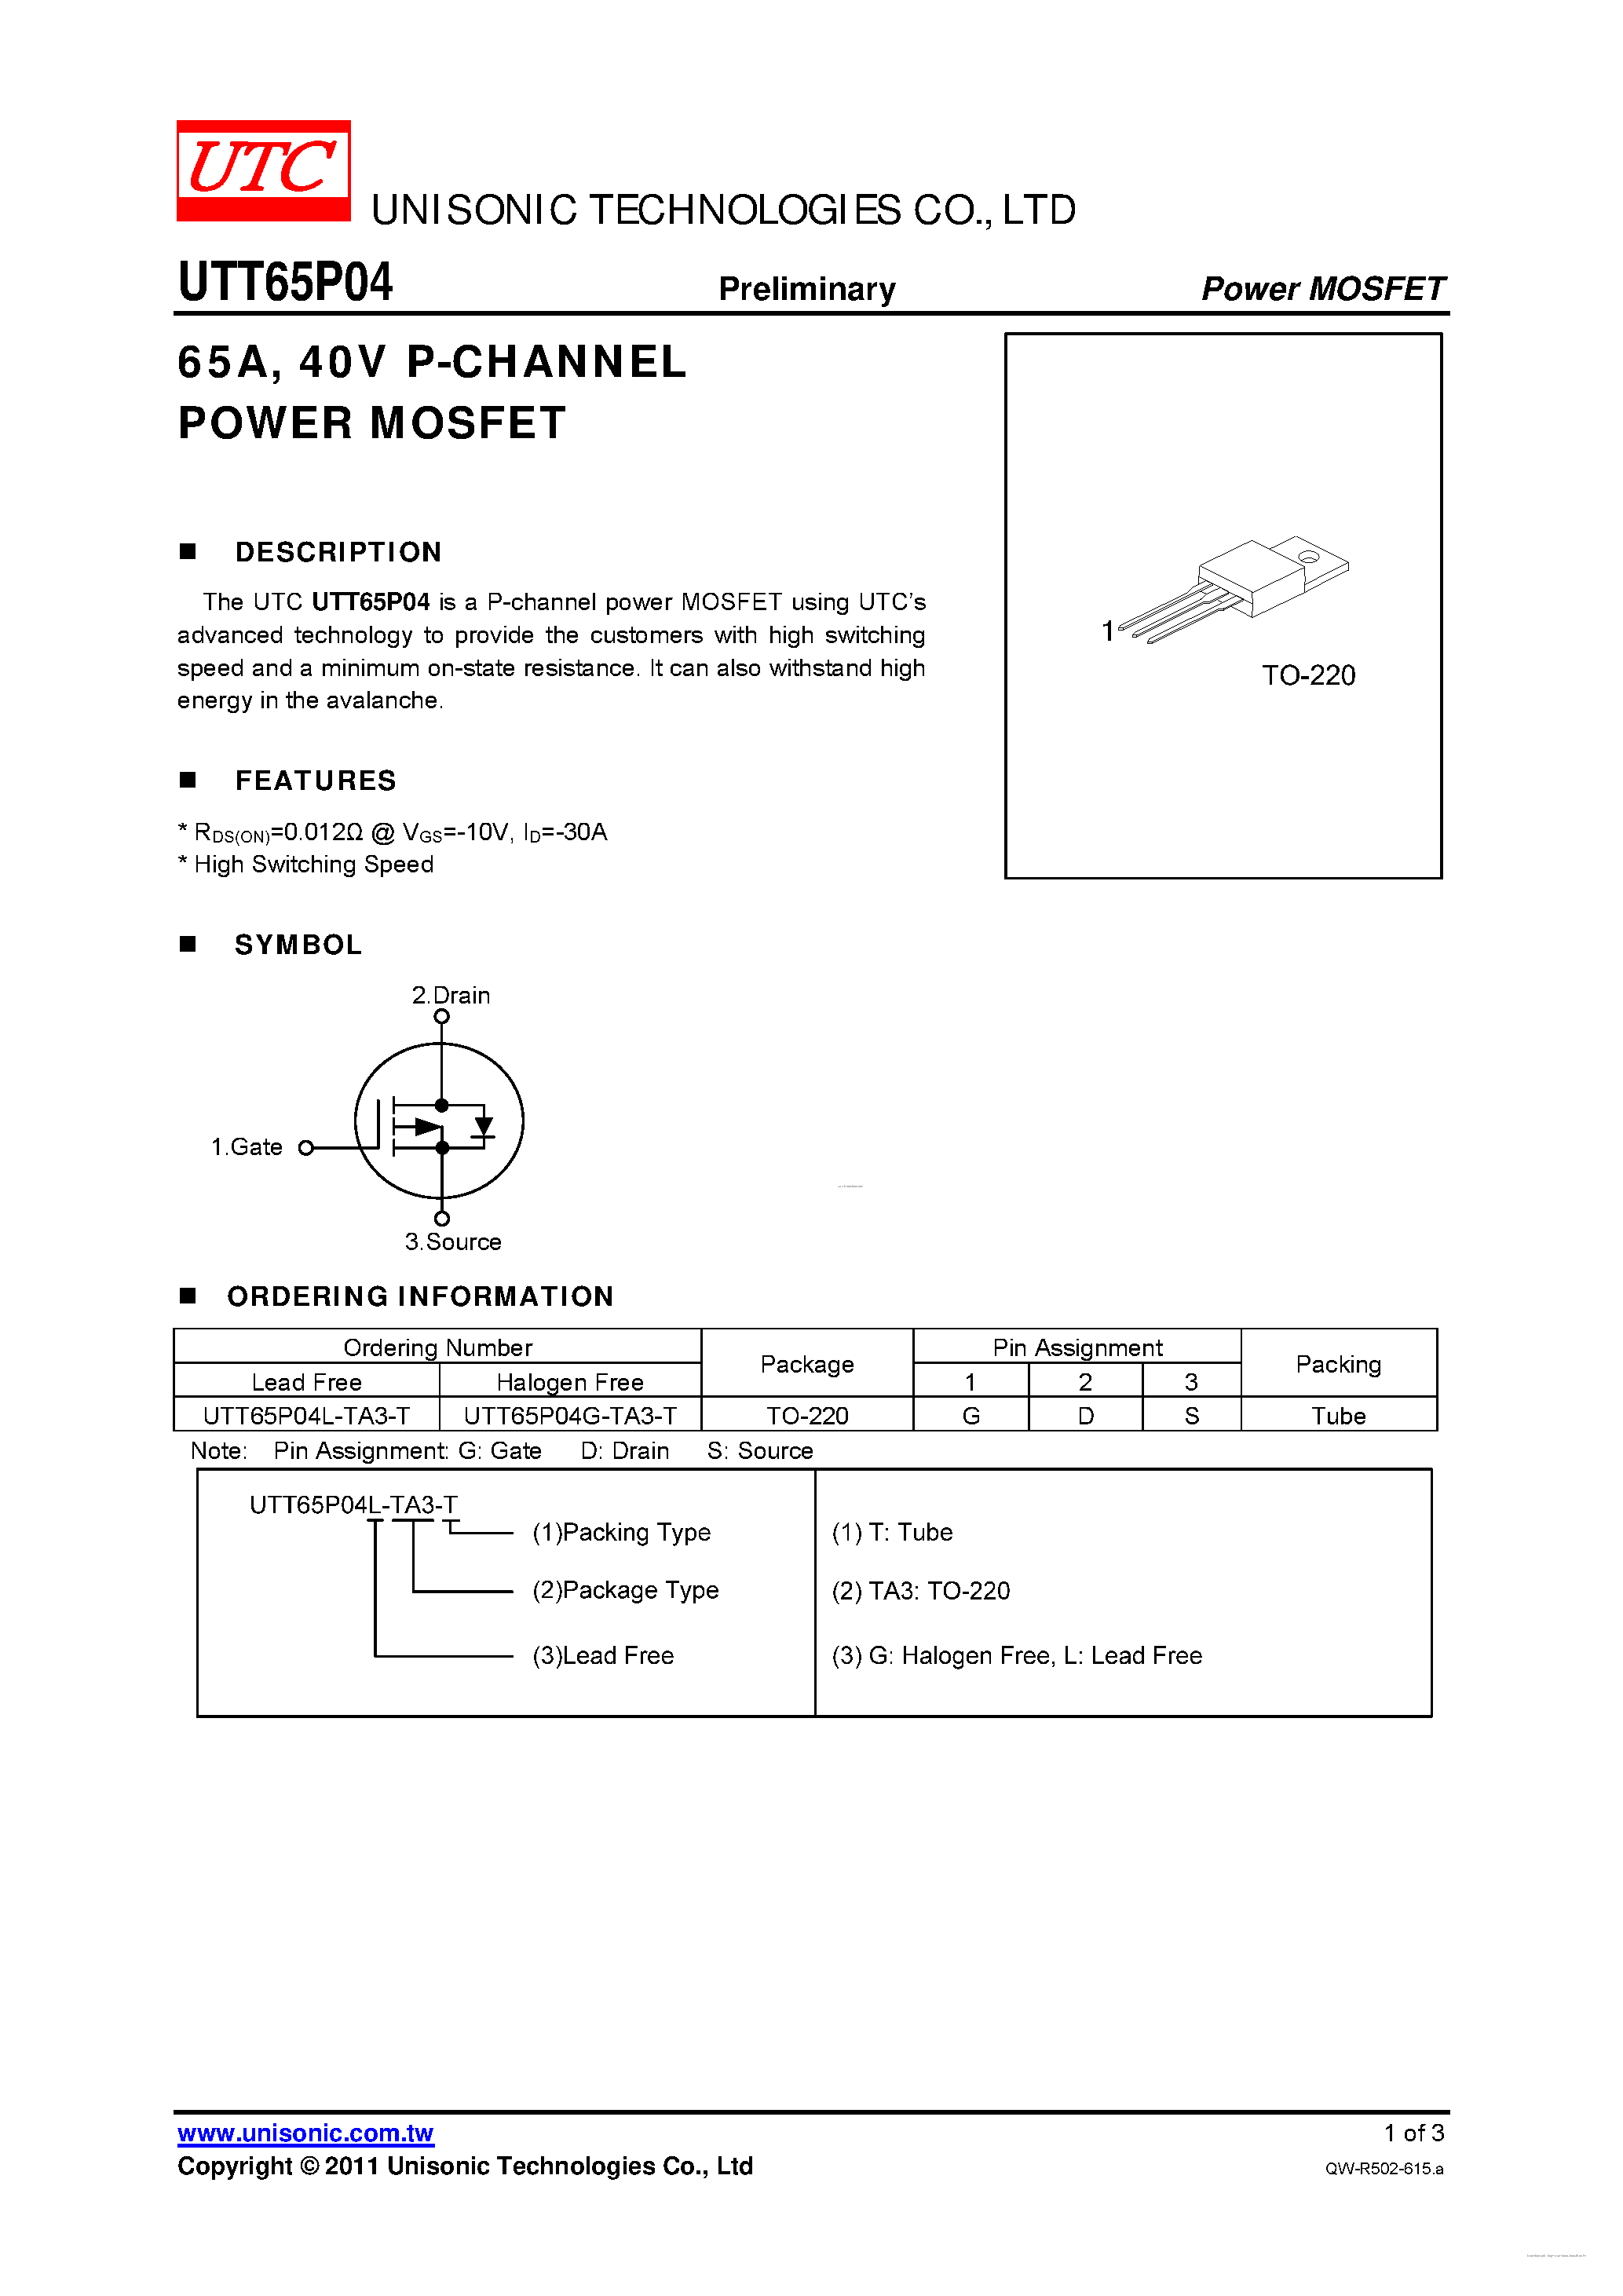 Datasheet UTT65P04 - P-CHANNEL POWER MOSFET page 1